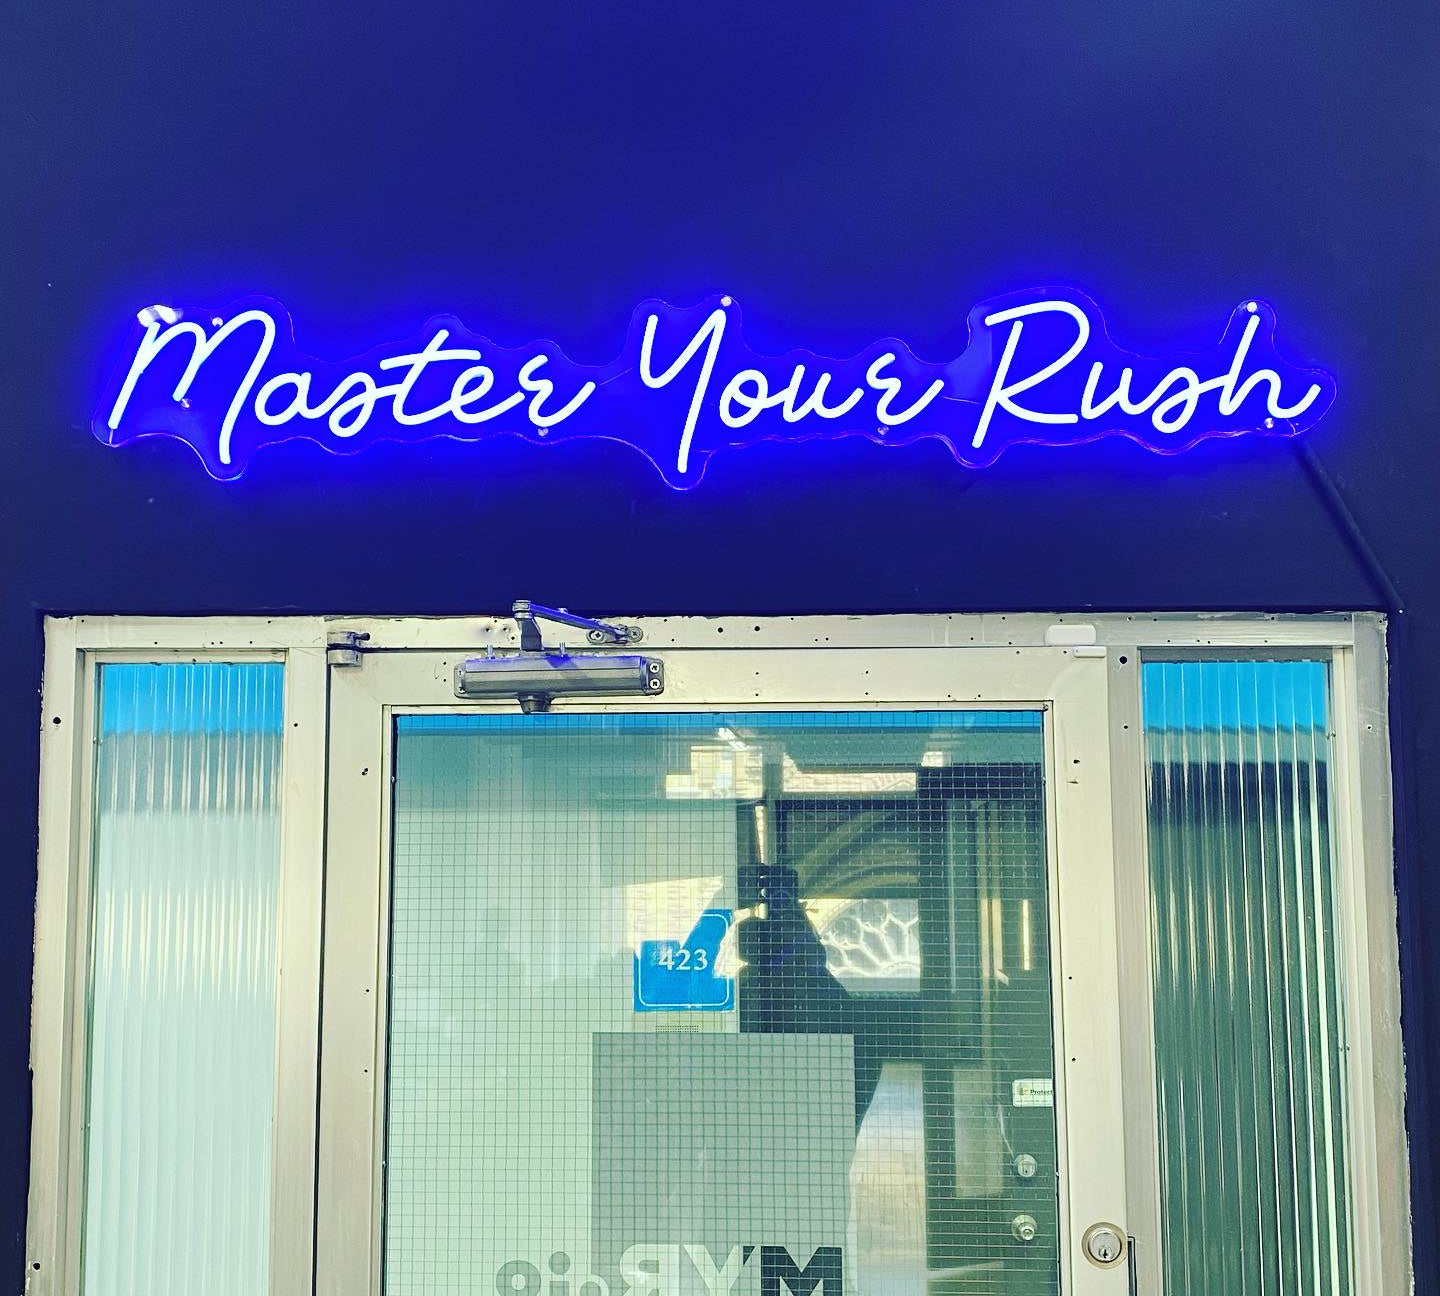 Master your rush neon sign